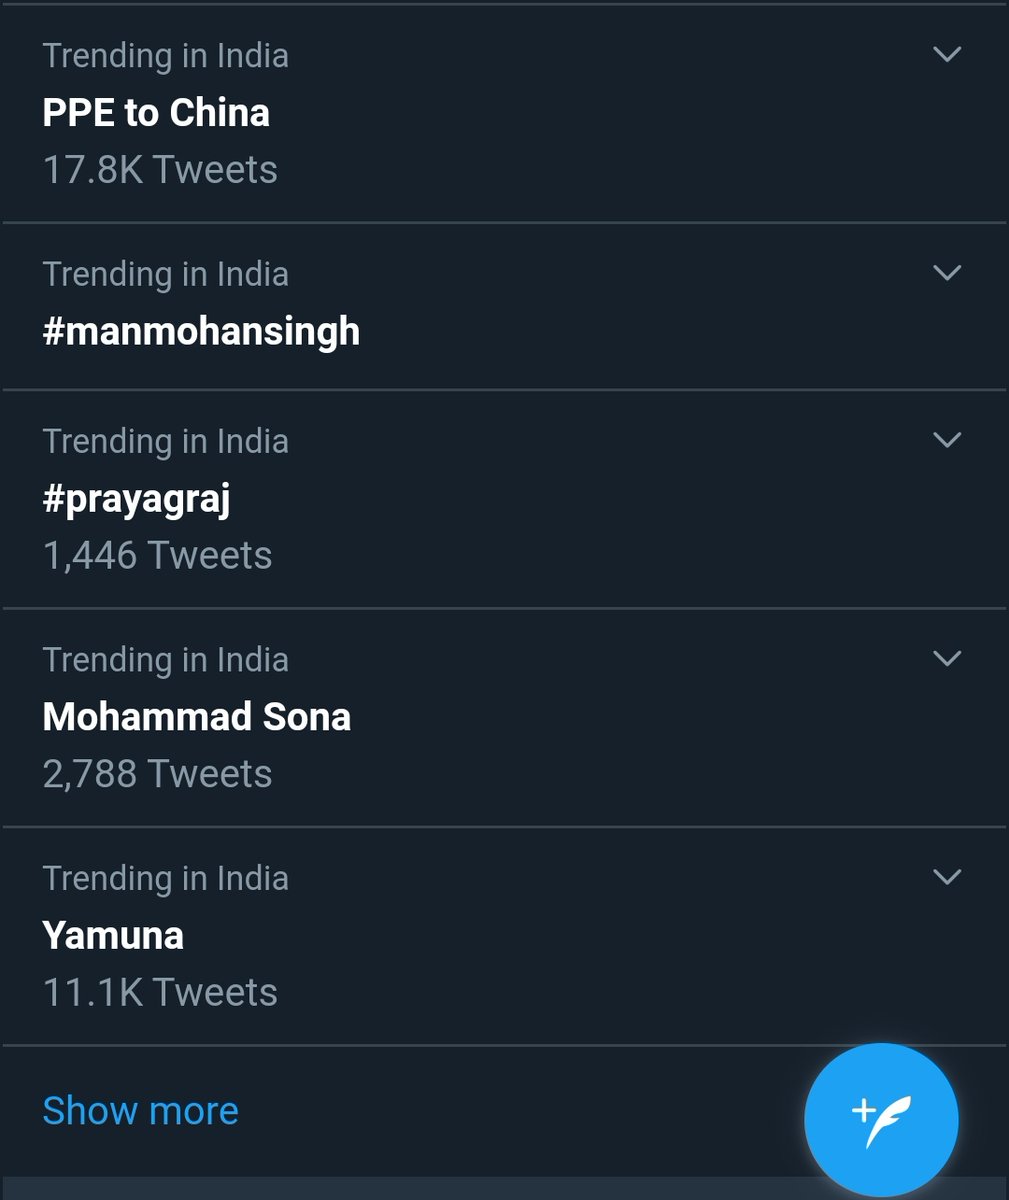 Now social Media. @TwitterIndia is playing the biggest role in propaganda media. By the time I am writing this thread IT cell has started trending "Mohammad Sona" on twitter and it is trending in India. With IT cell trolls spreading communal hatred and spewing (12/n)